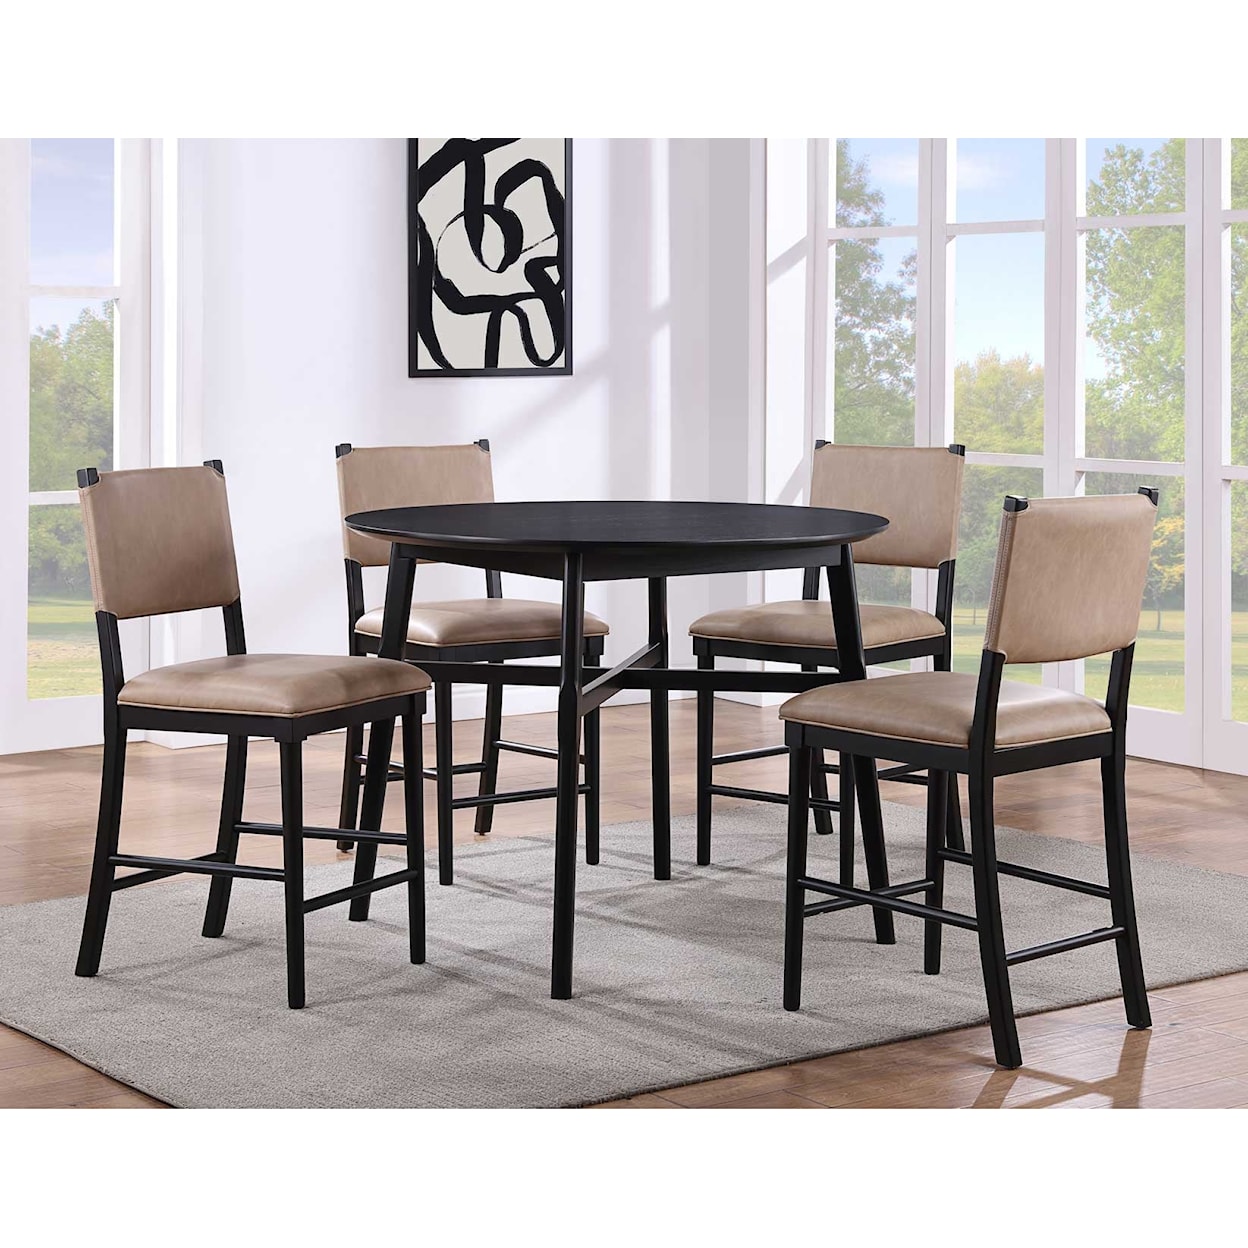 Steve Silver Oslo 5-Piece Counter Height Dining Set